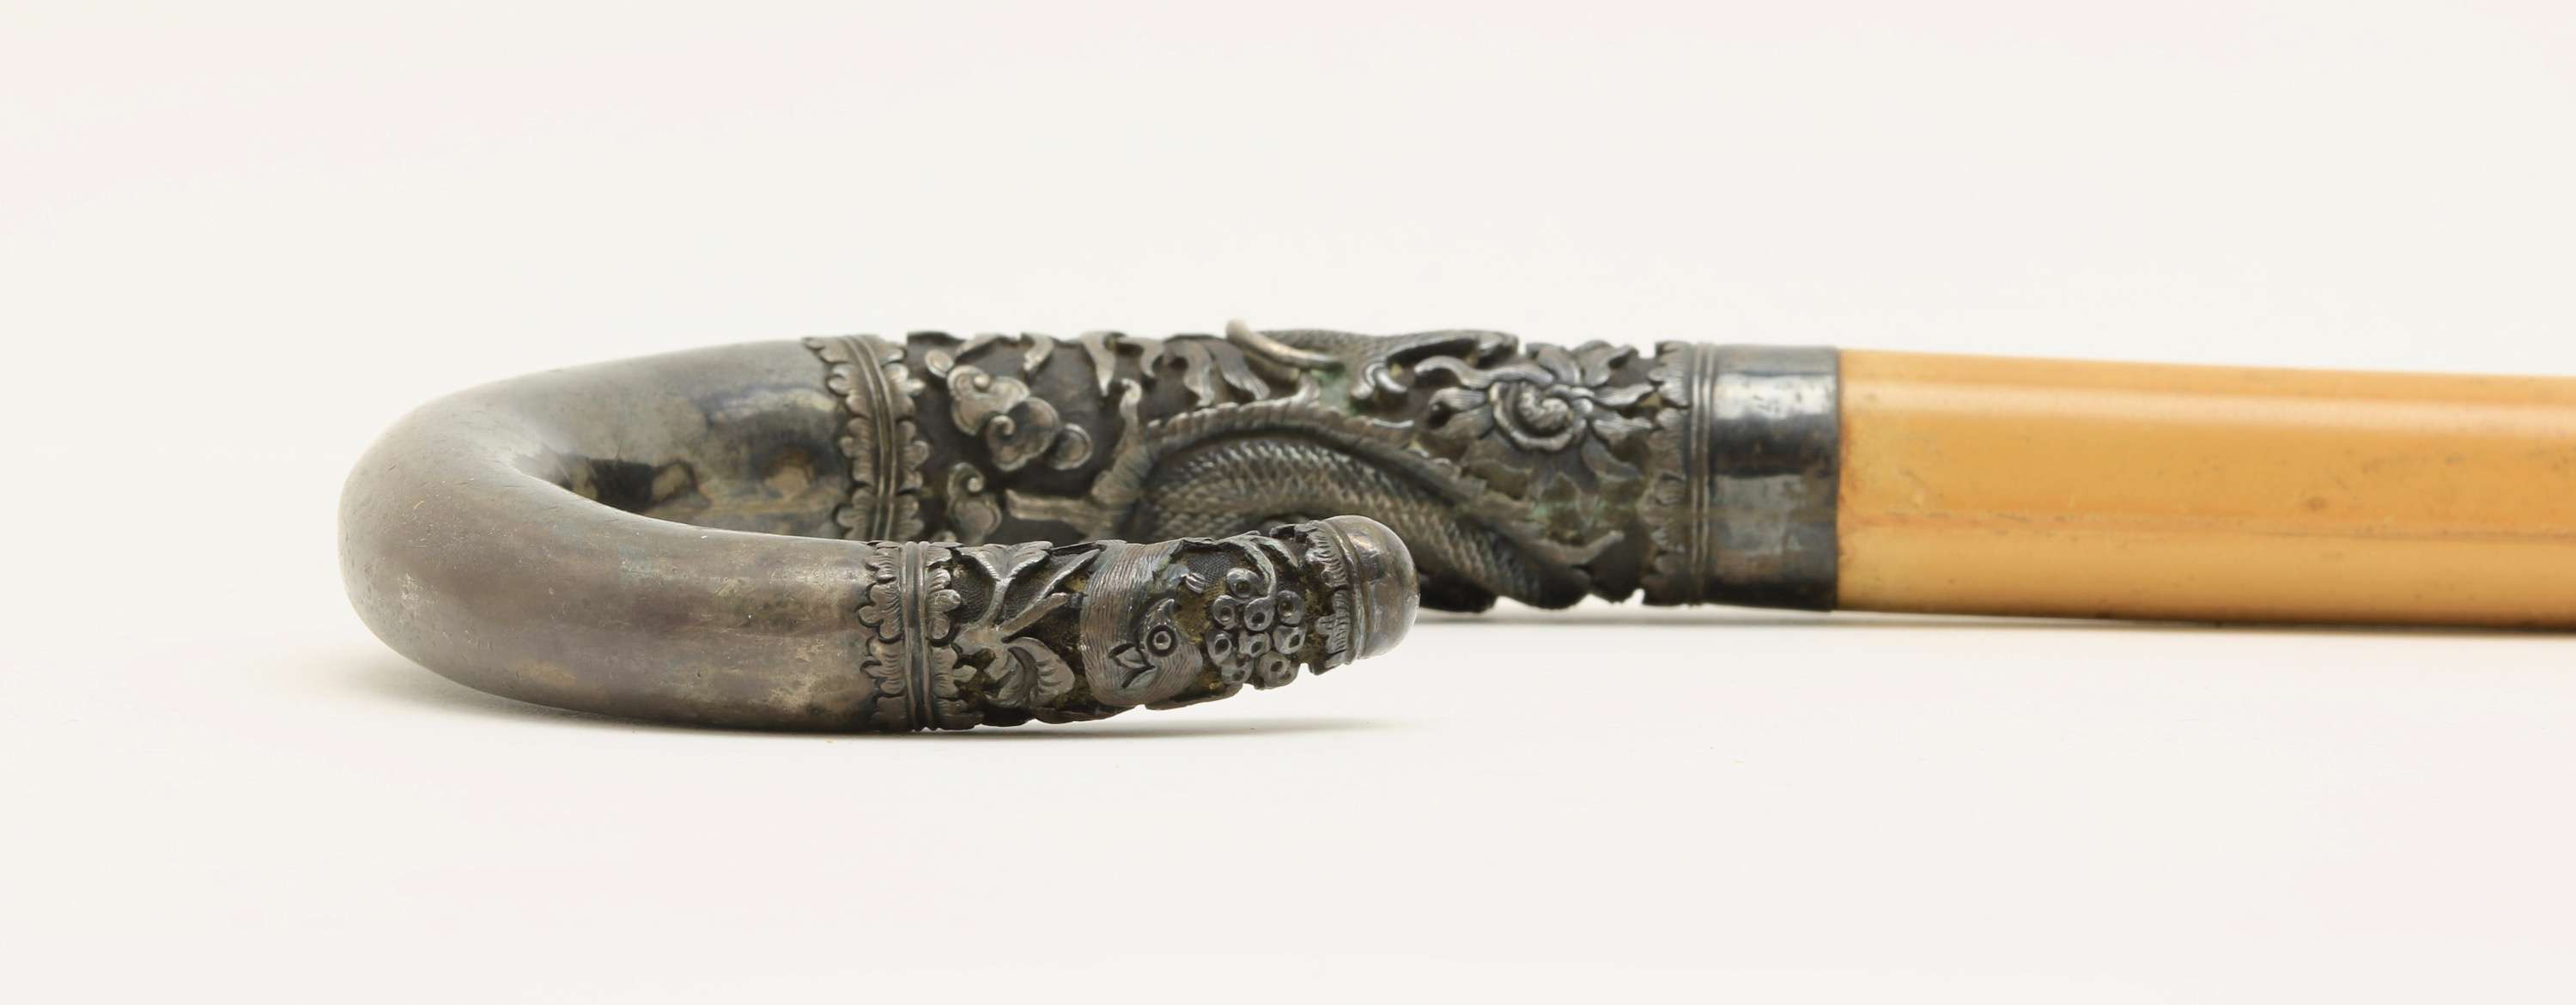 Vietnamese crook handle cane with silver handle